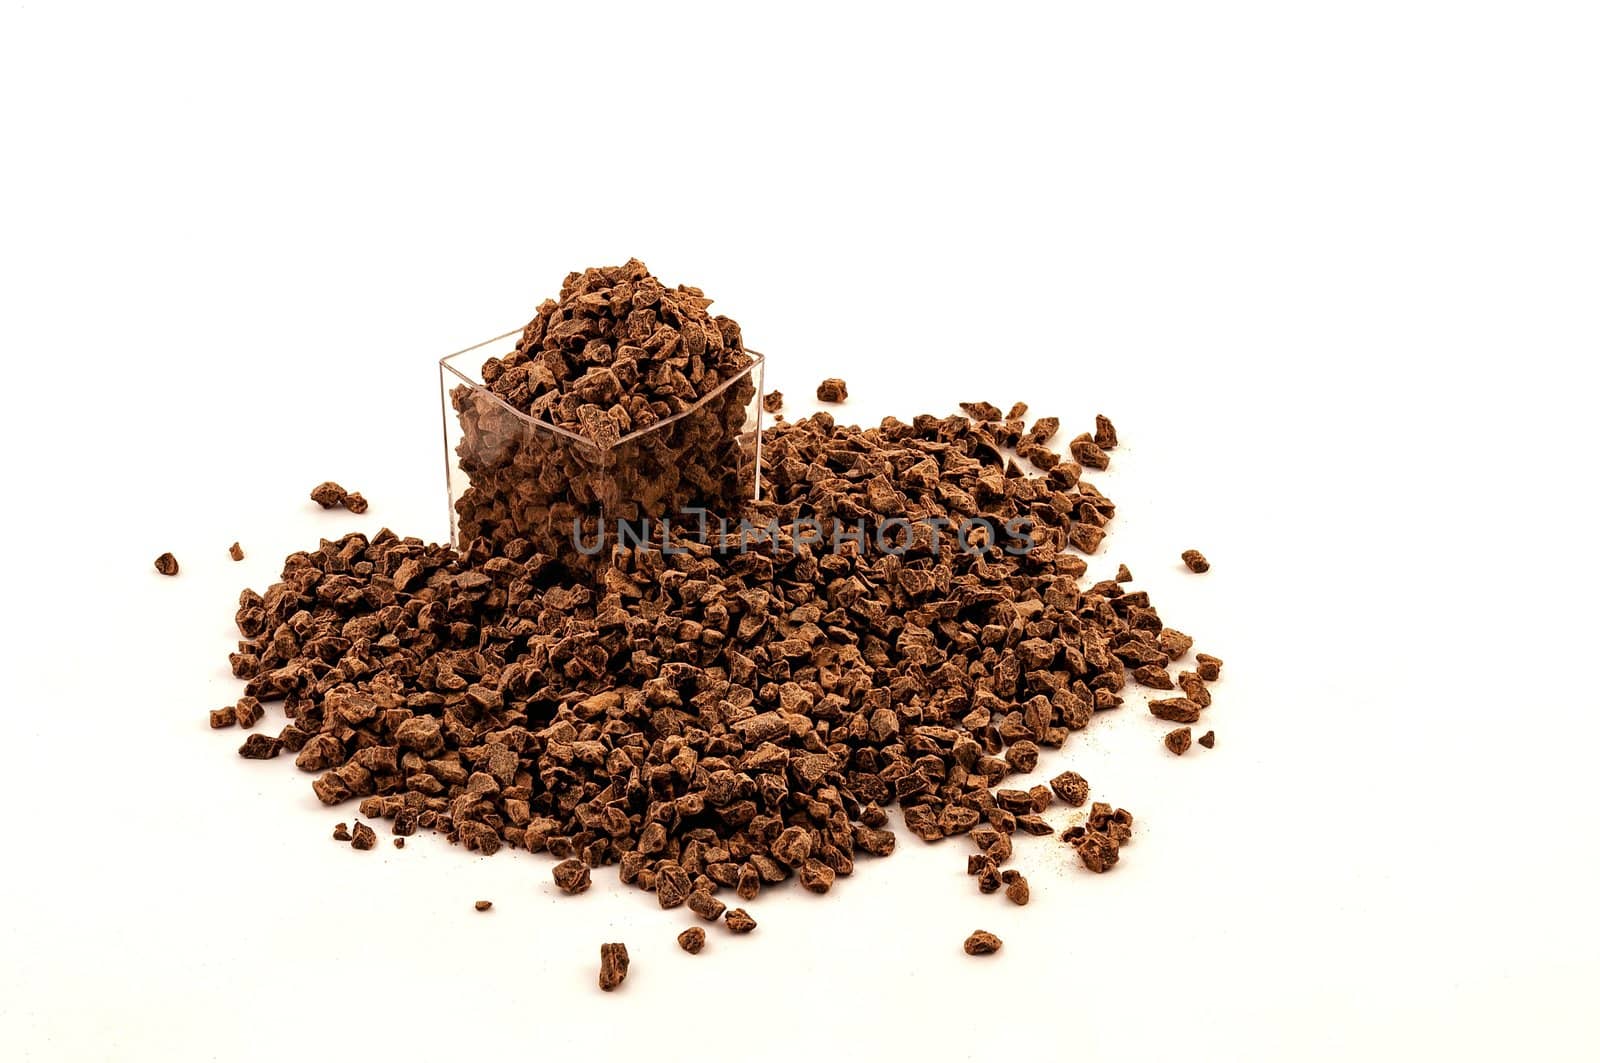 Crumbled chocolate ingredient by rigamondis